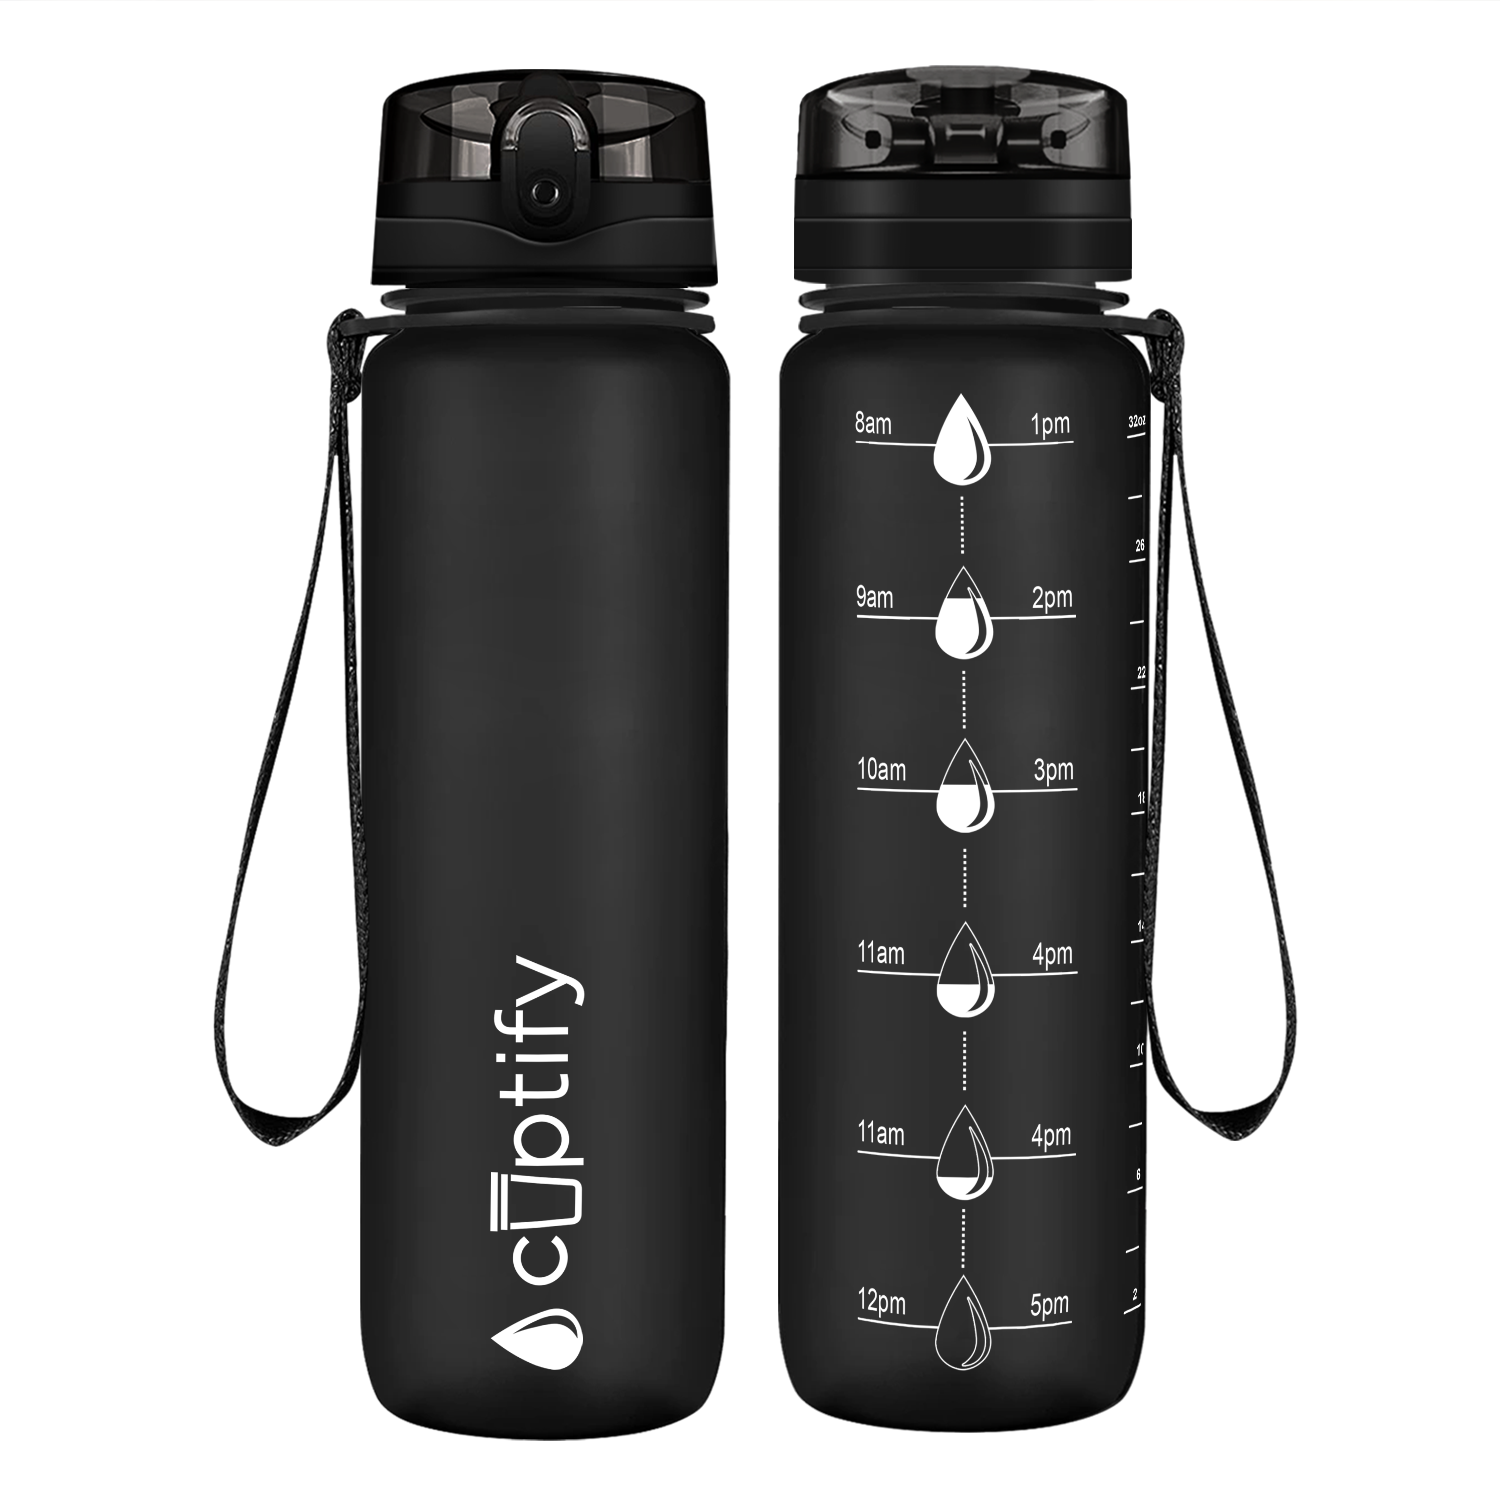 Cuptify Black Frosted Hydration Tracker Water Bottle